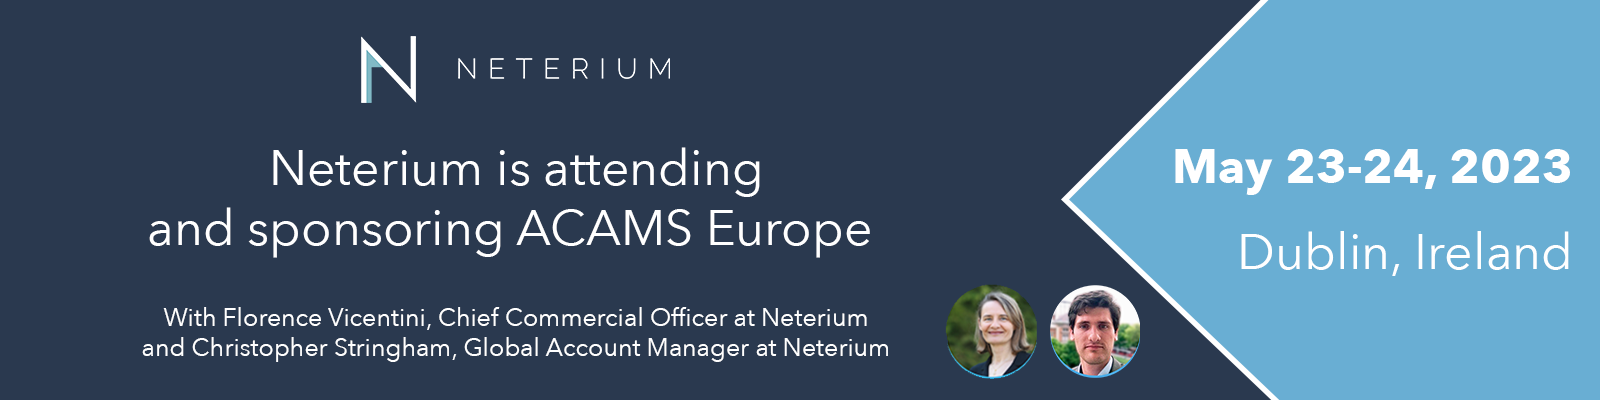 ACAMS Europe Conference